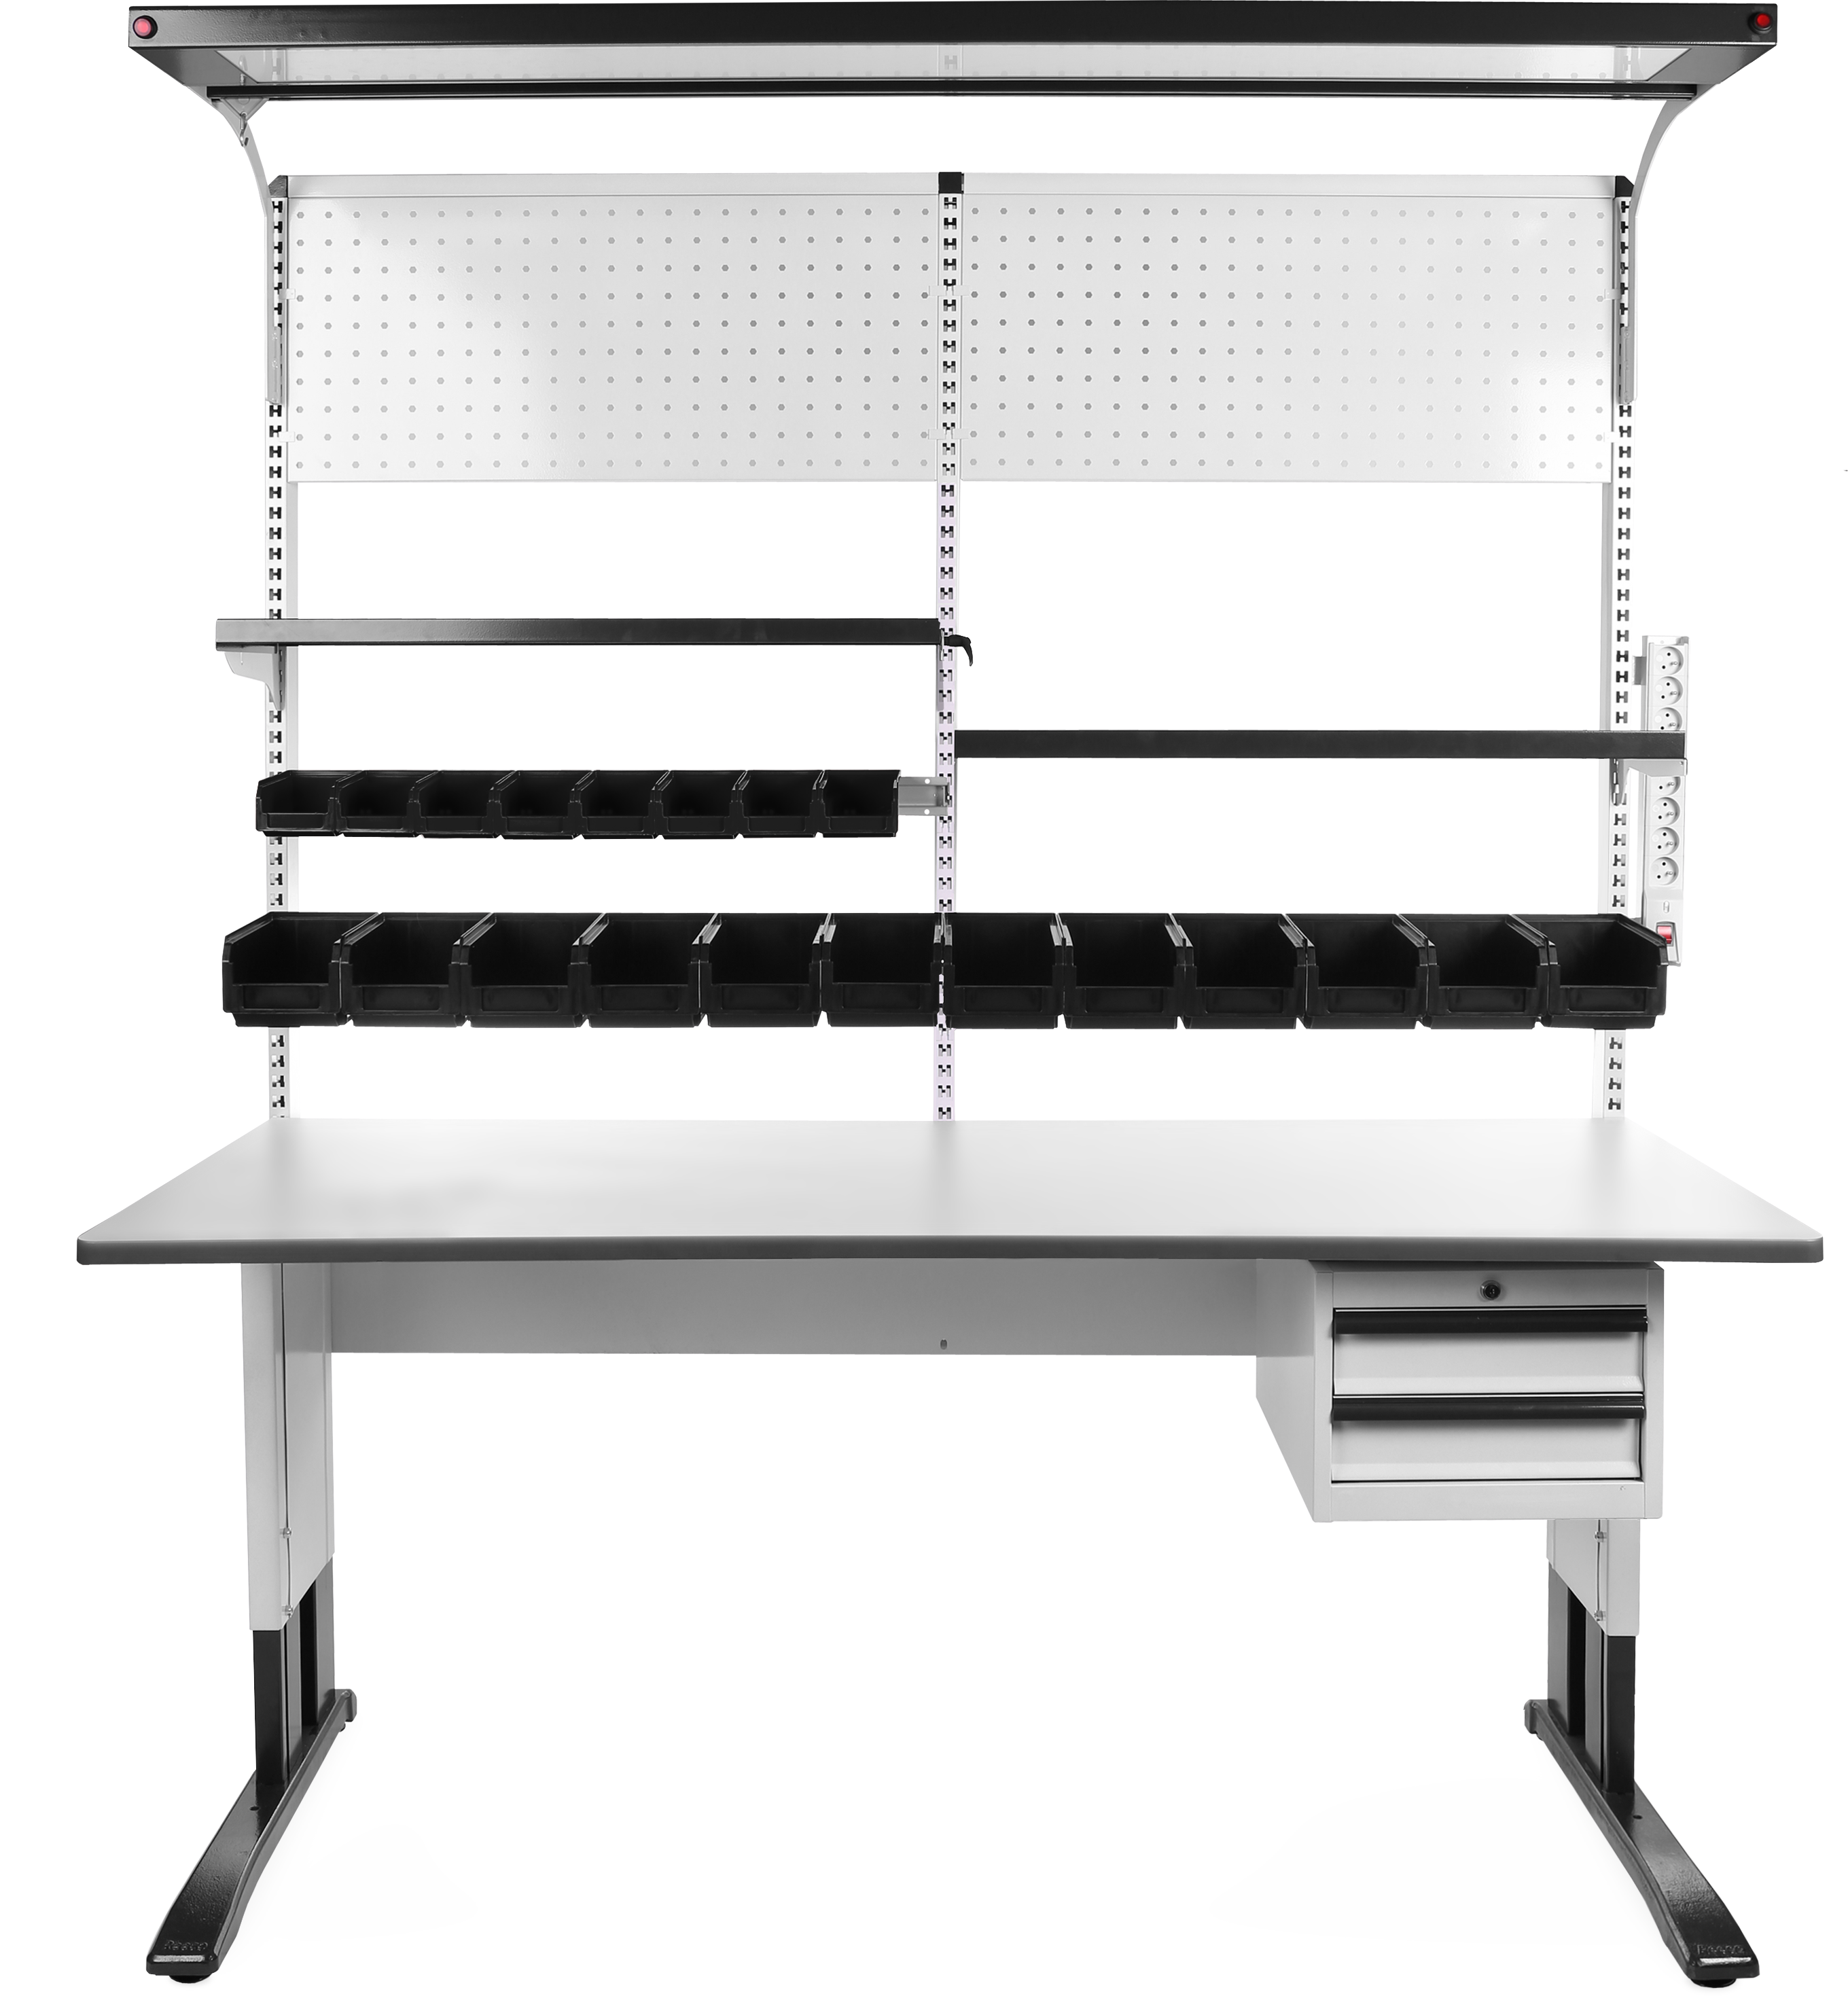 ESD-Workstation-Premium-Standard-Rectangular-Table-Top-Reeco-Robert-1830-x-750-mm-ESD-Products-AES